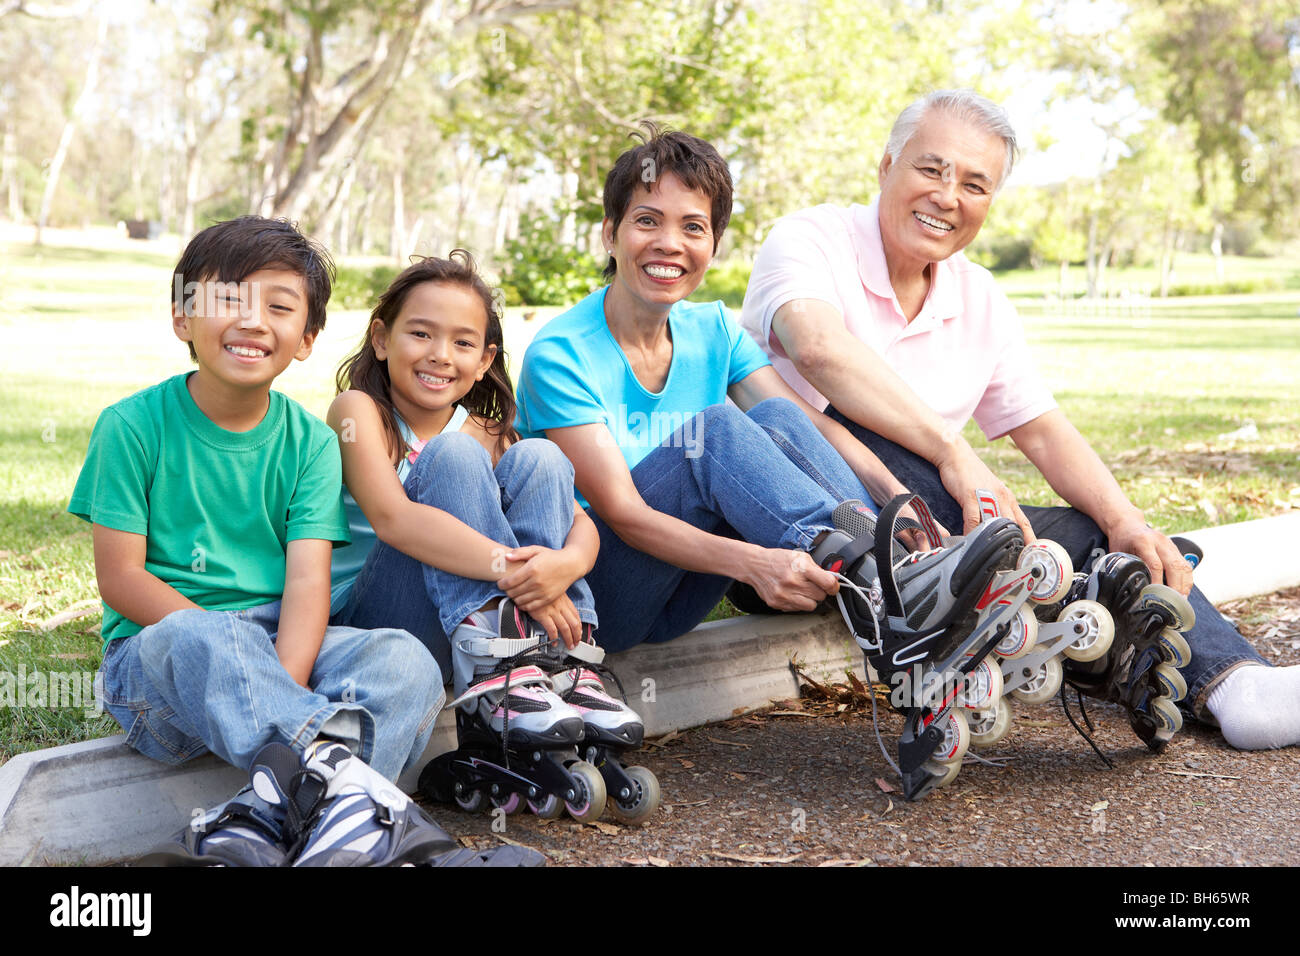 Grandparents With Grandchildren Putting On In Line Skates In Park Stock Photo